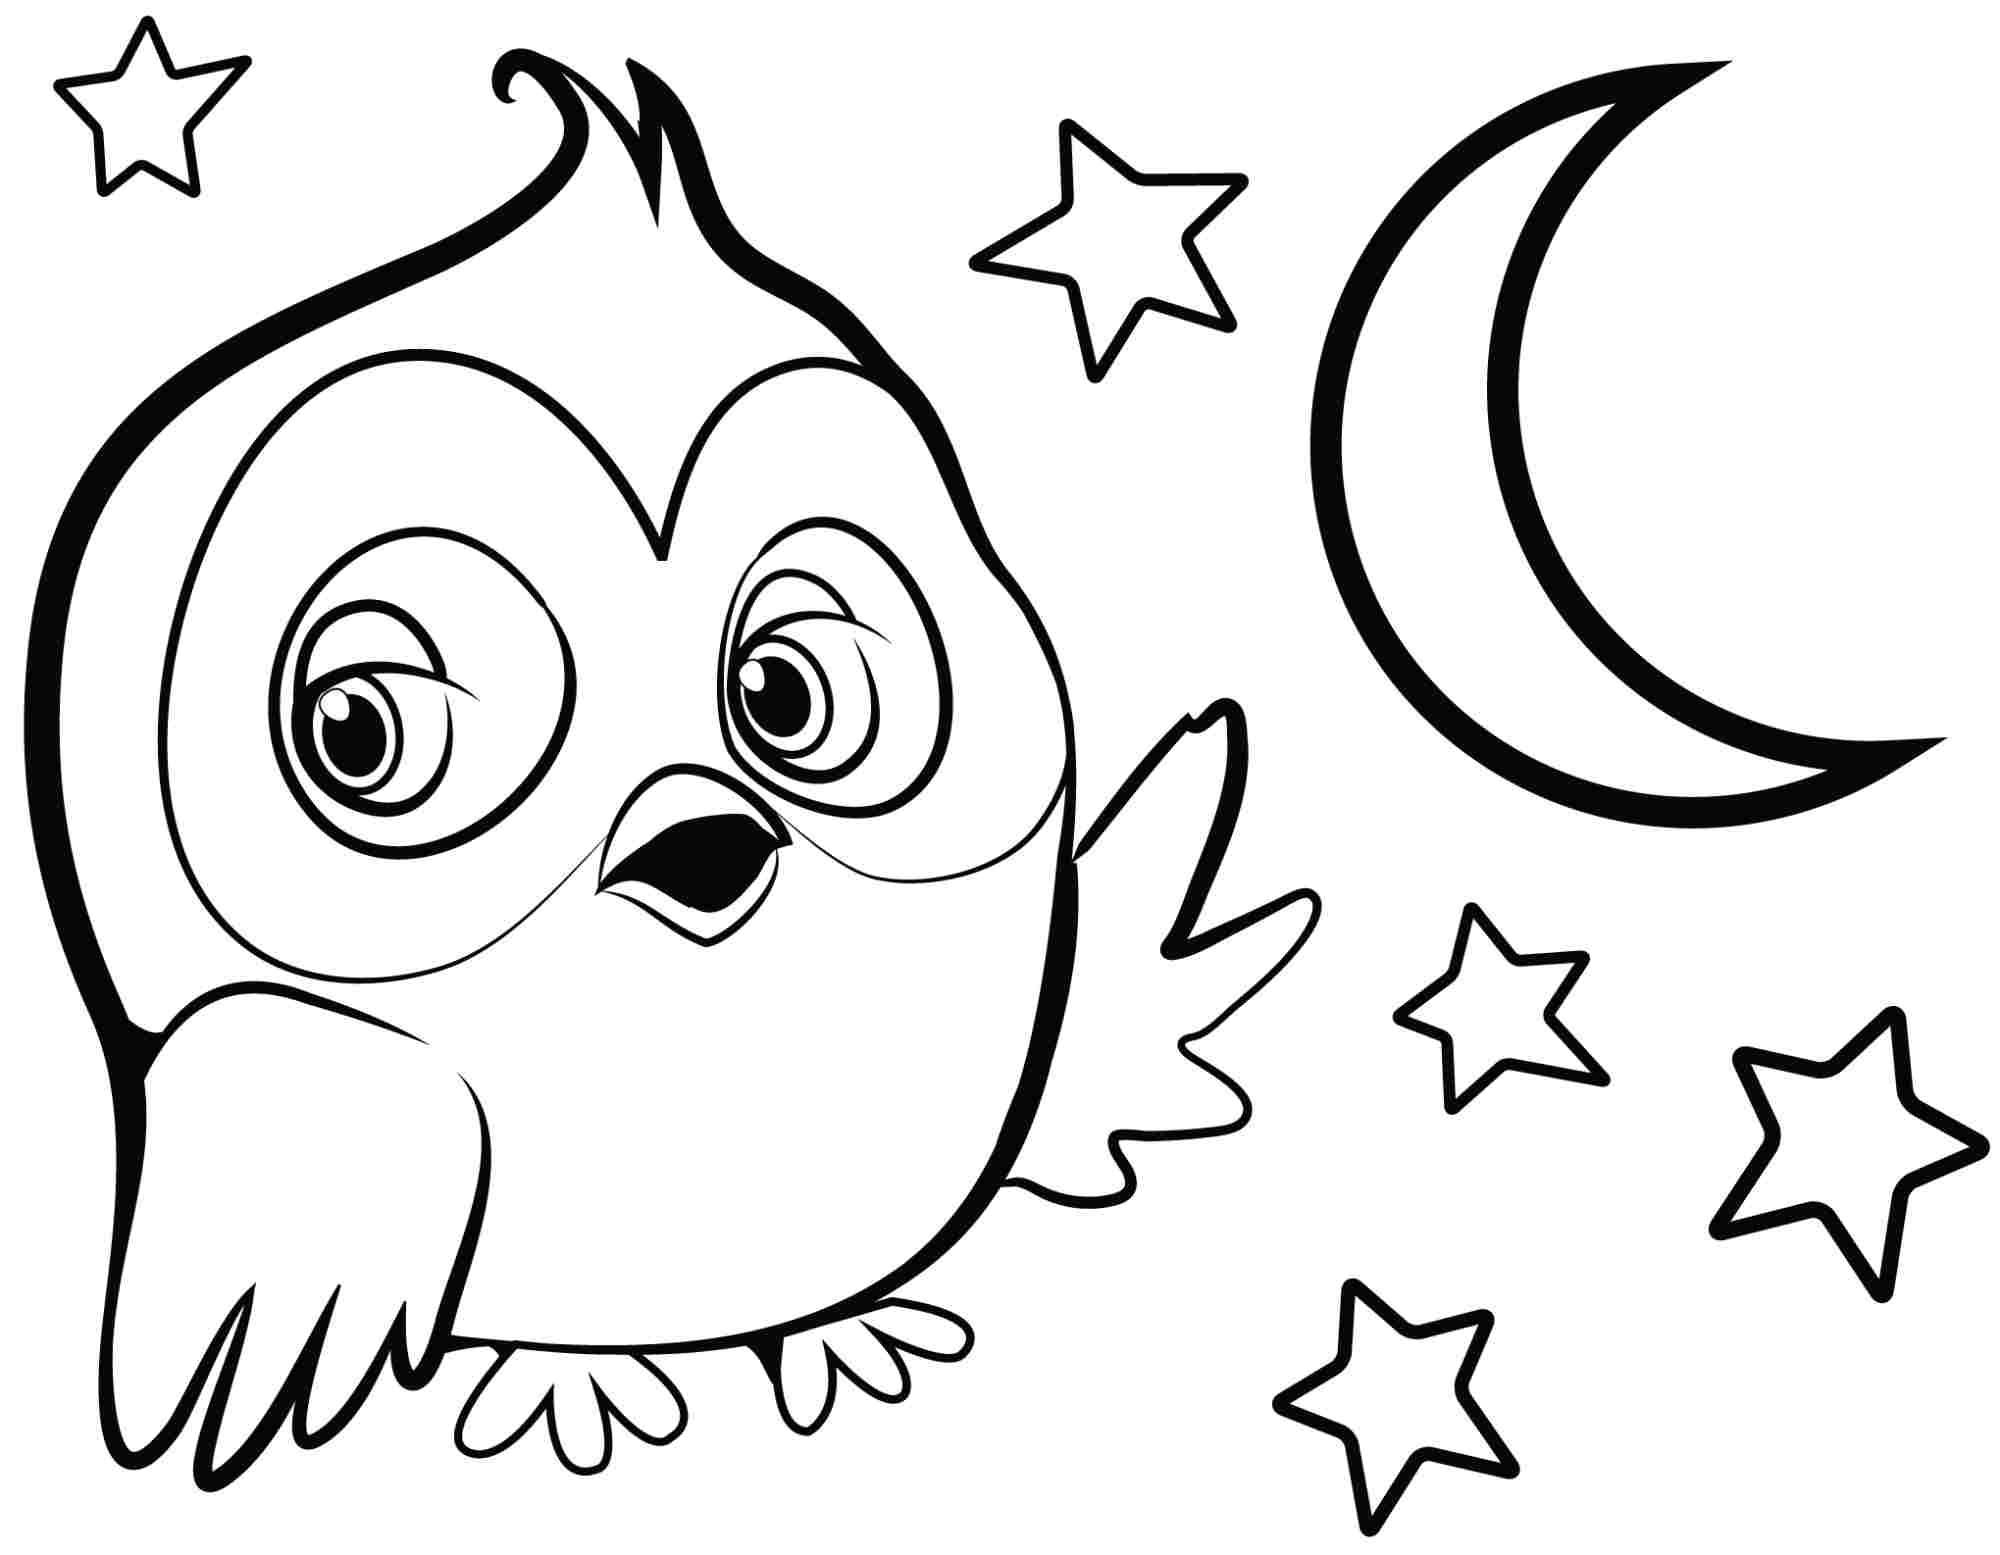 Easy Animal Coloring Pages For Kids at GetColorings.com   Free ...